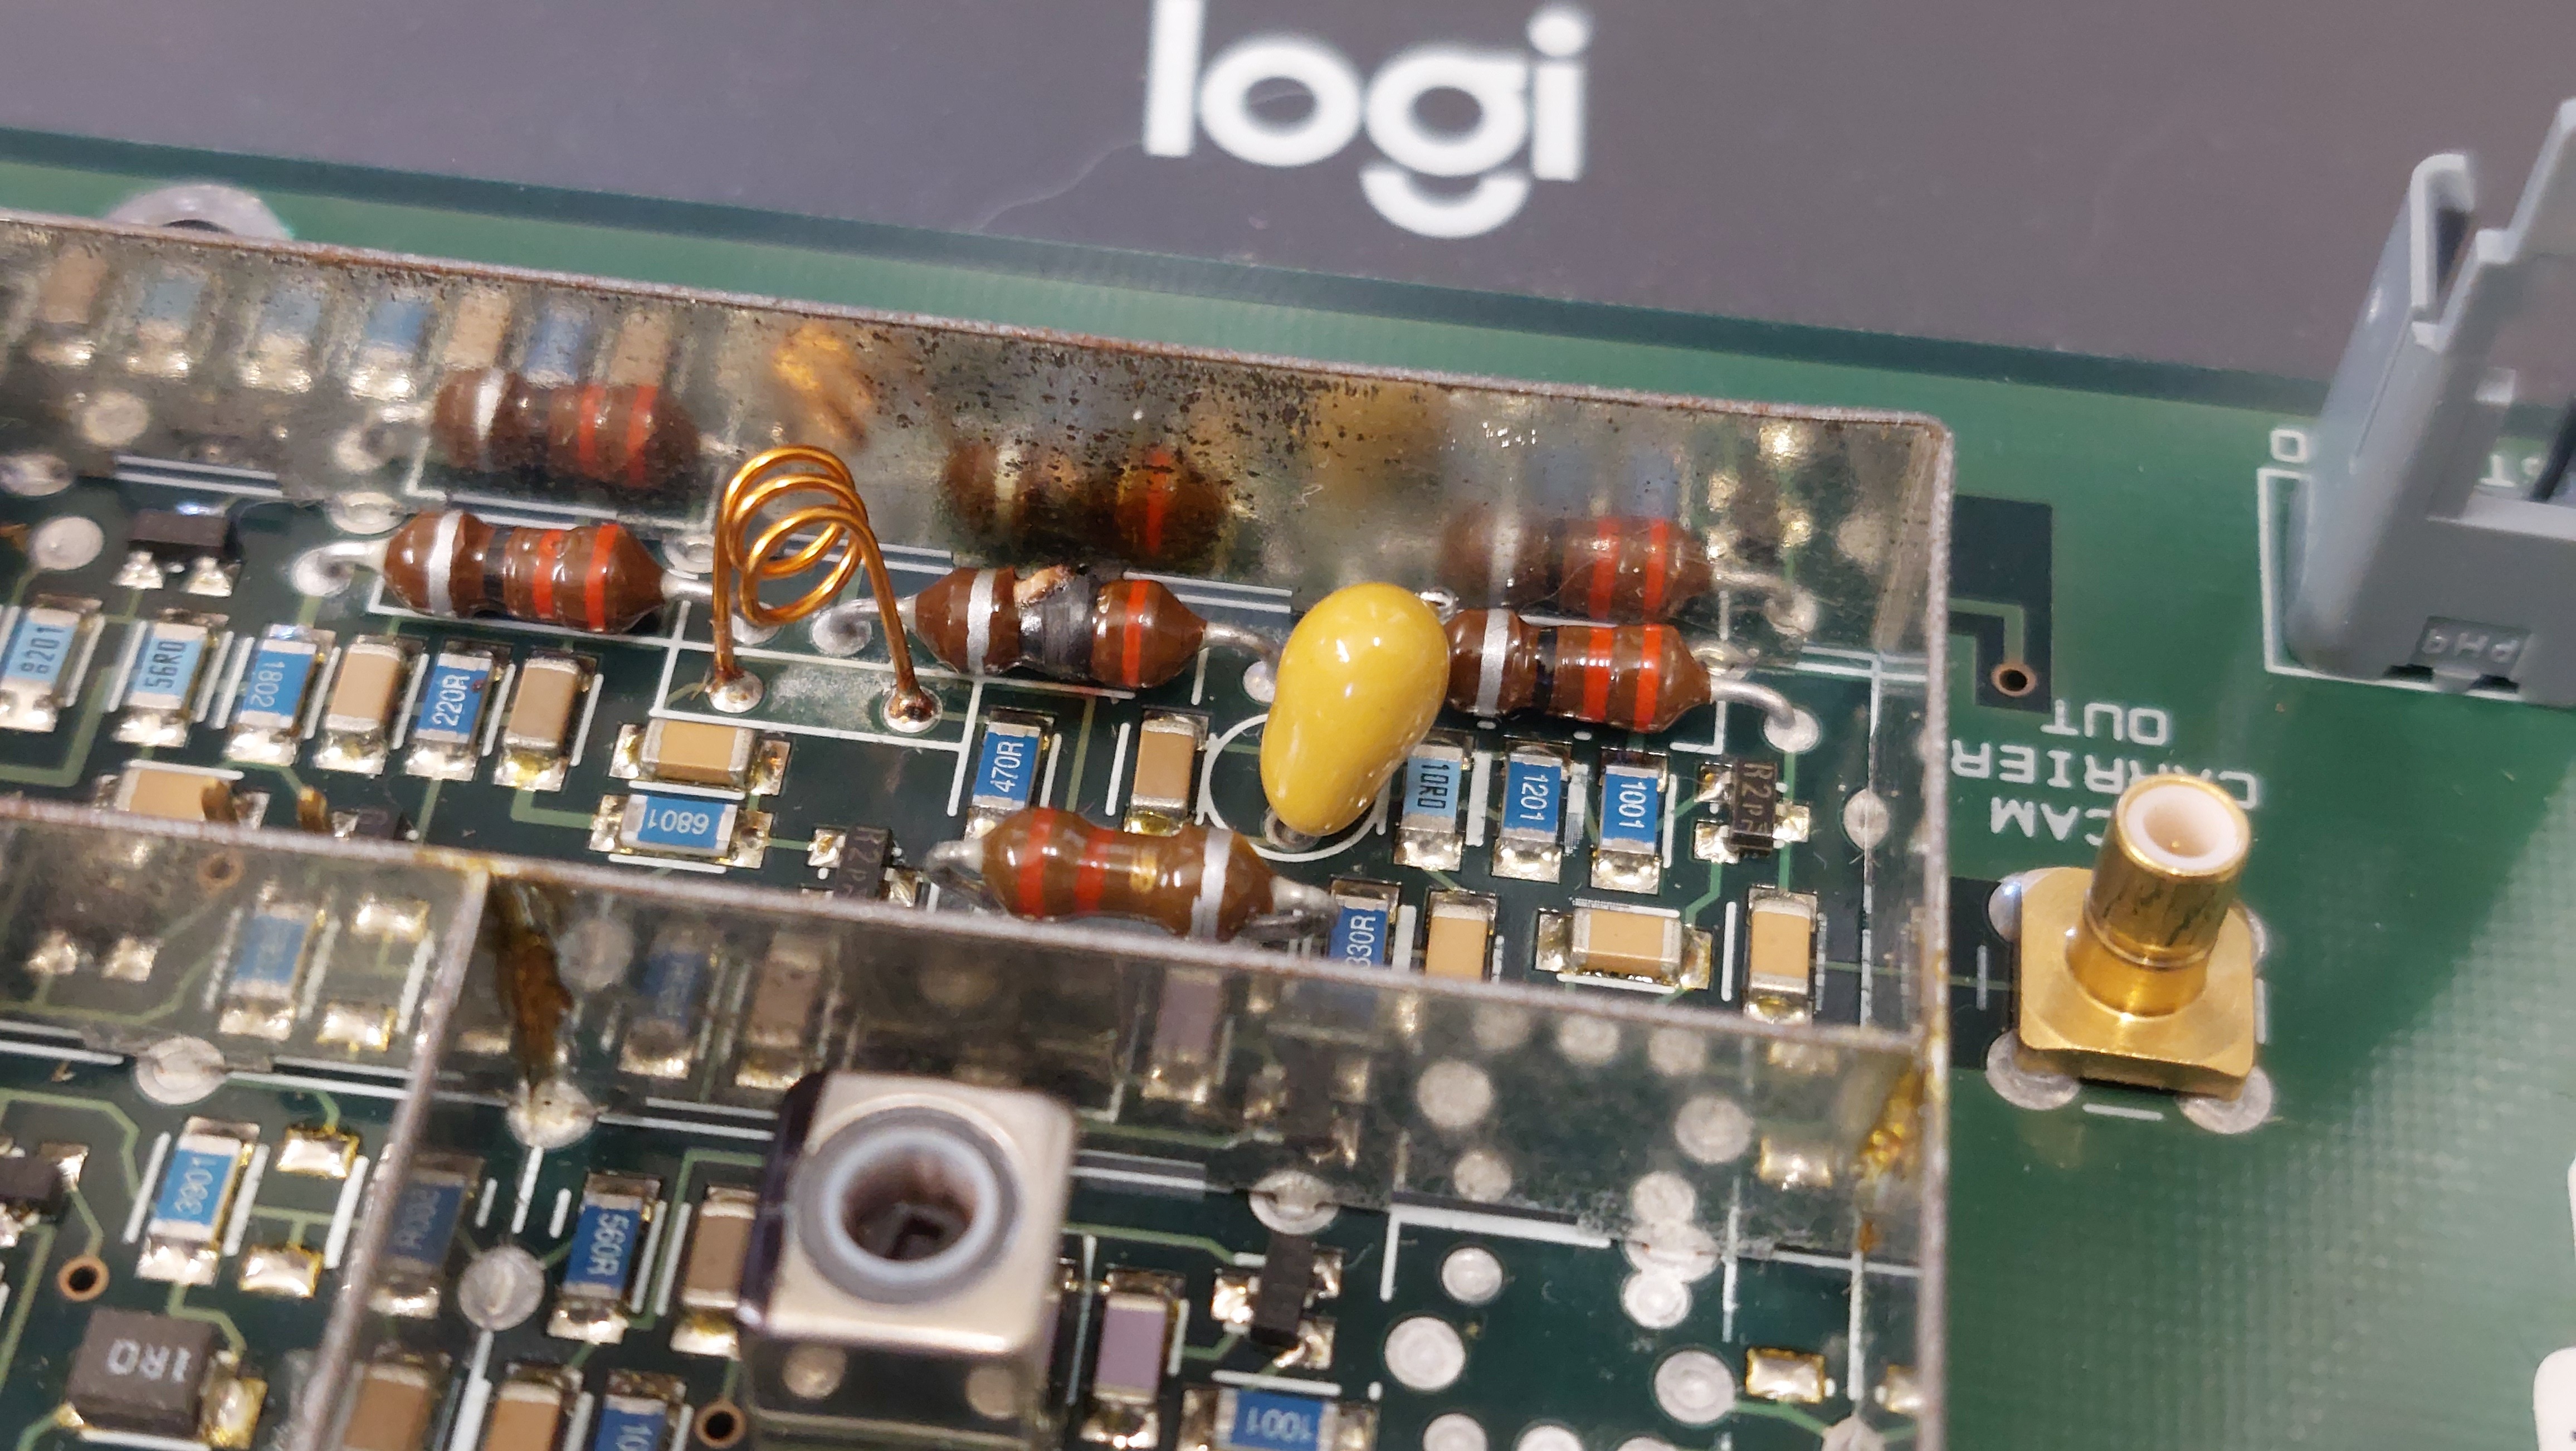 Close-up photo of the PCB with an inductor visibly burned, next to a yellow tantalum capacitor